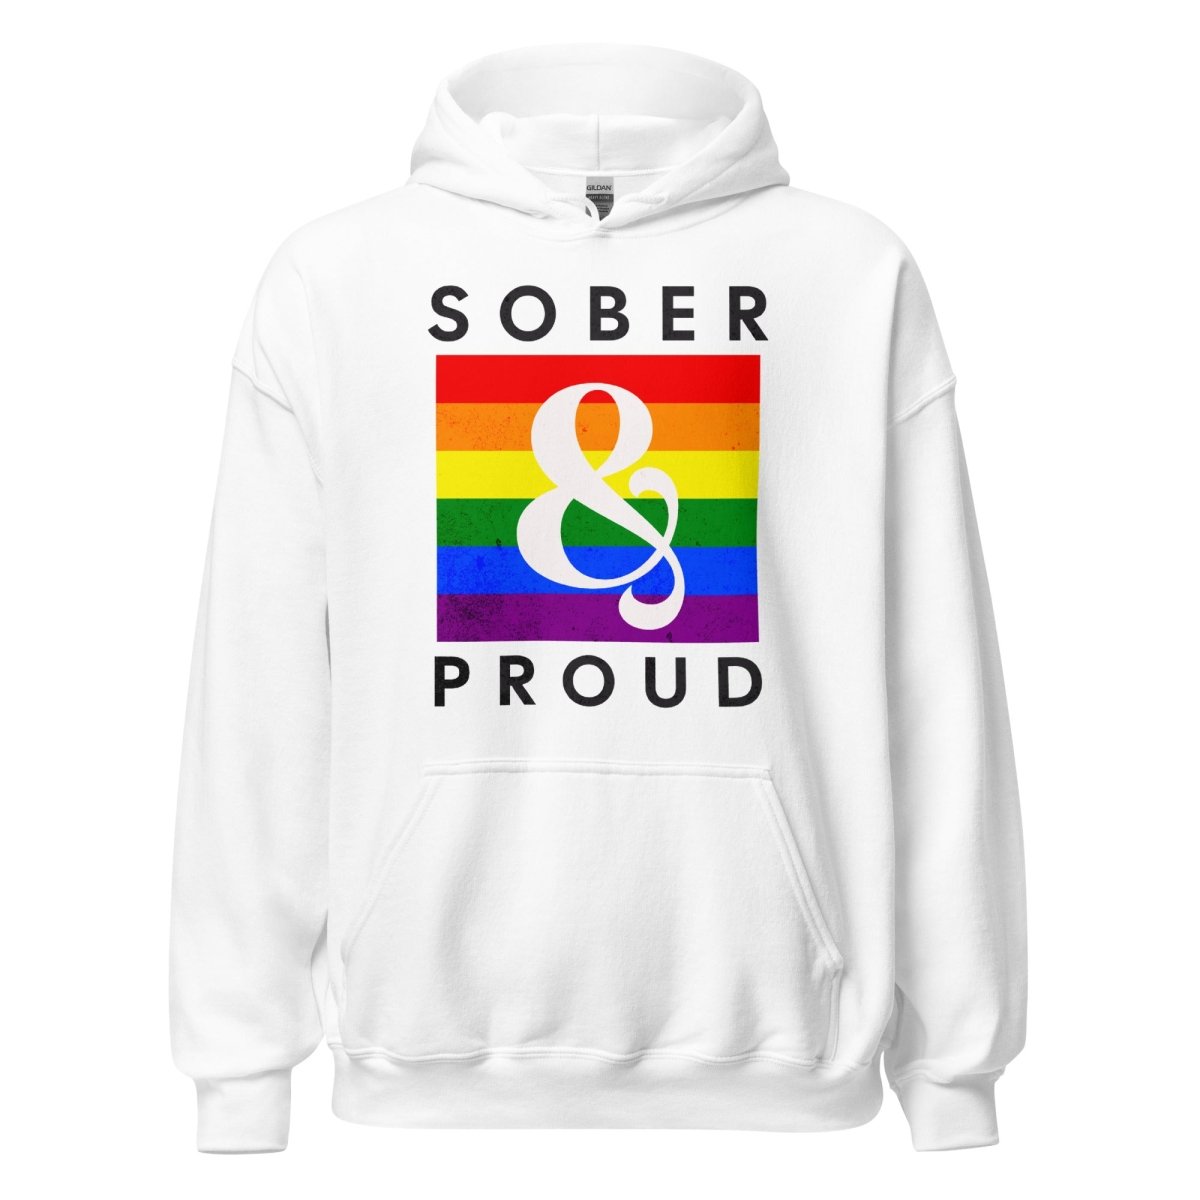 Sober & Proud Unisex Hoodie - Rainbow Resilience Collection - Sobervation